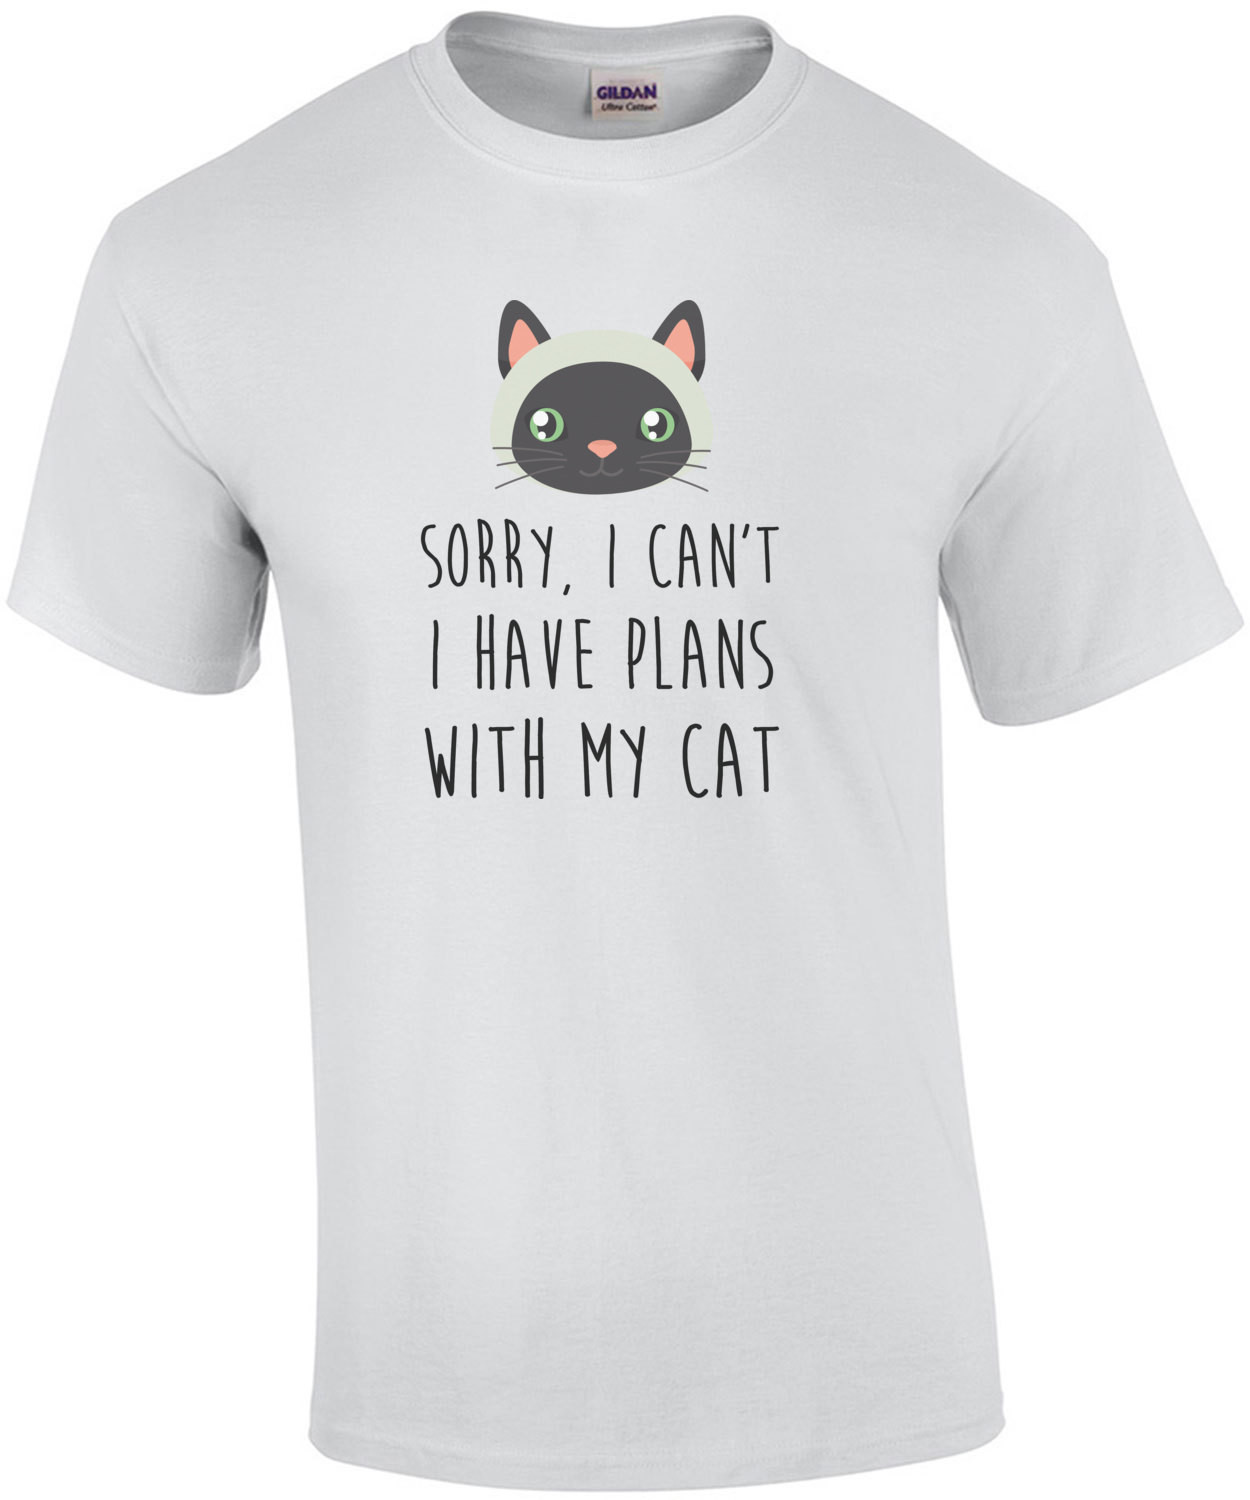 Sorry, I can't I have plans with my cat - funny cat t-shirt